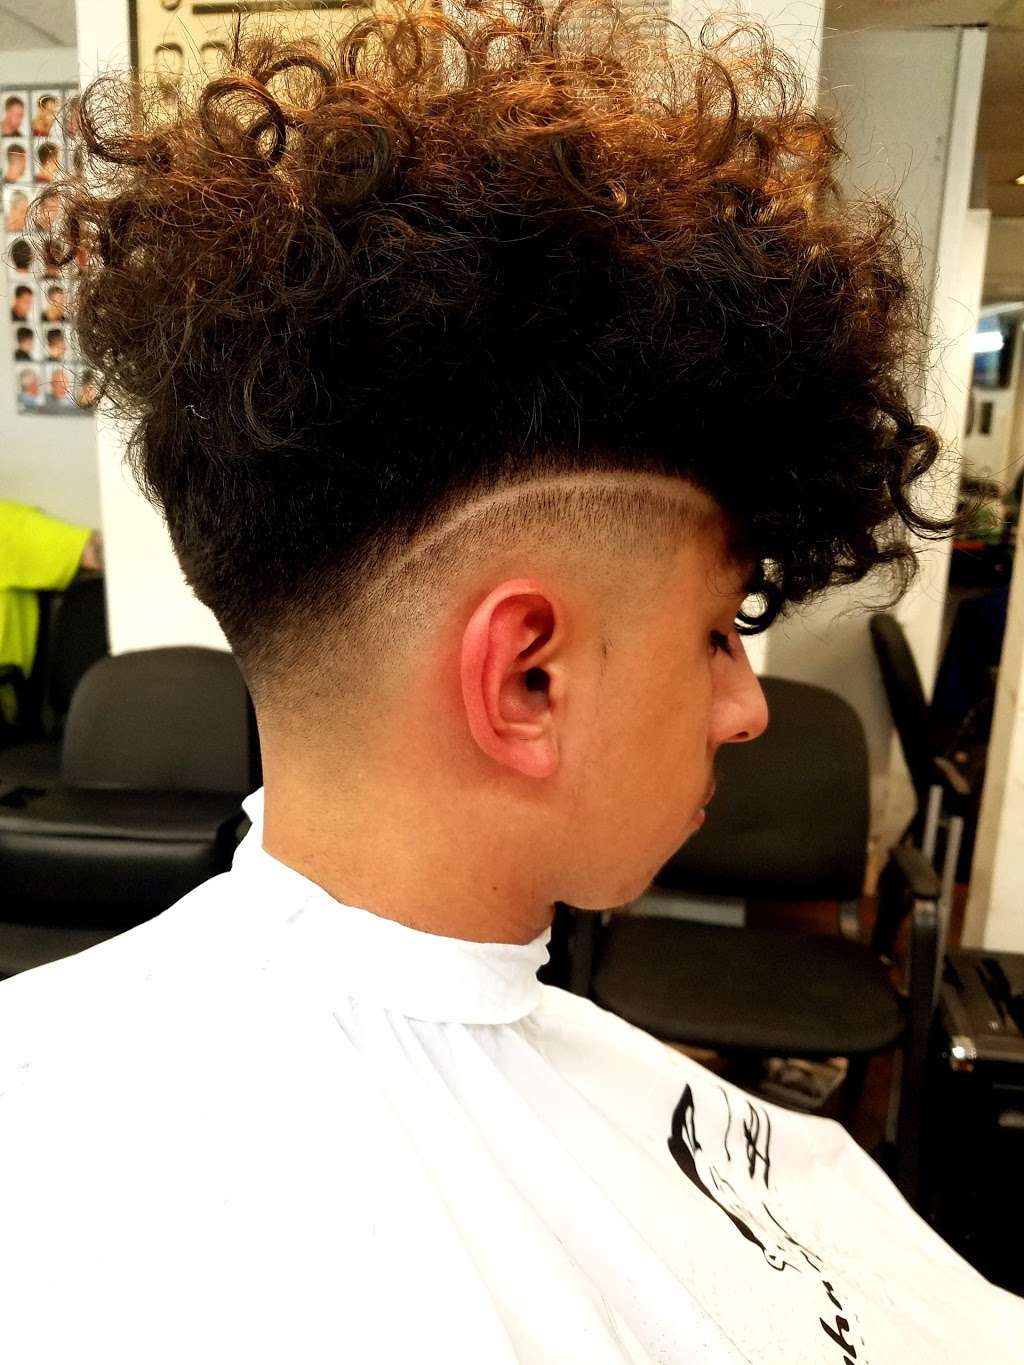 Gs Barber Shop | Photo 8 of 10 | Address: 5220 Gus Thomasson Rd, Mesquite, TX 75150, USA | Phone: (469) 767-3419